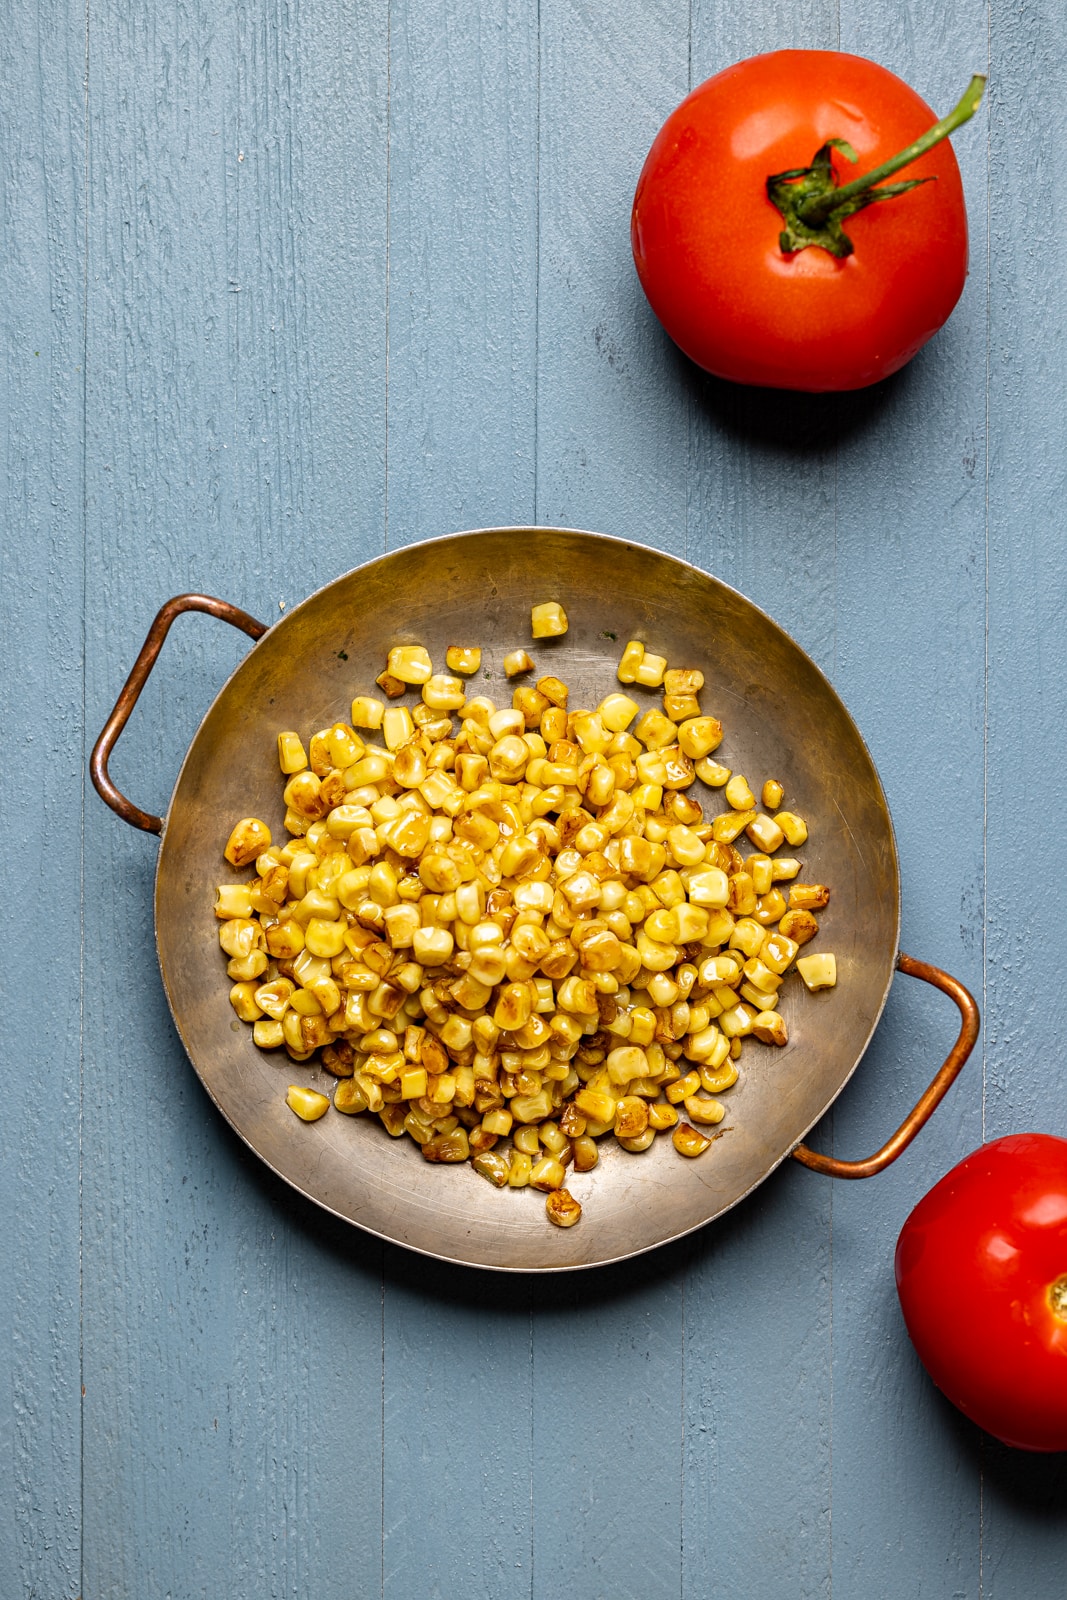 Charred corn in a bowl on a blue wood table with two tomatoes.